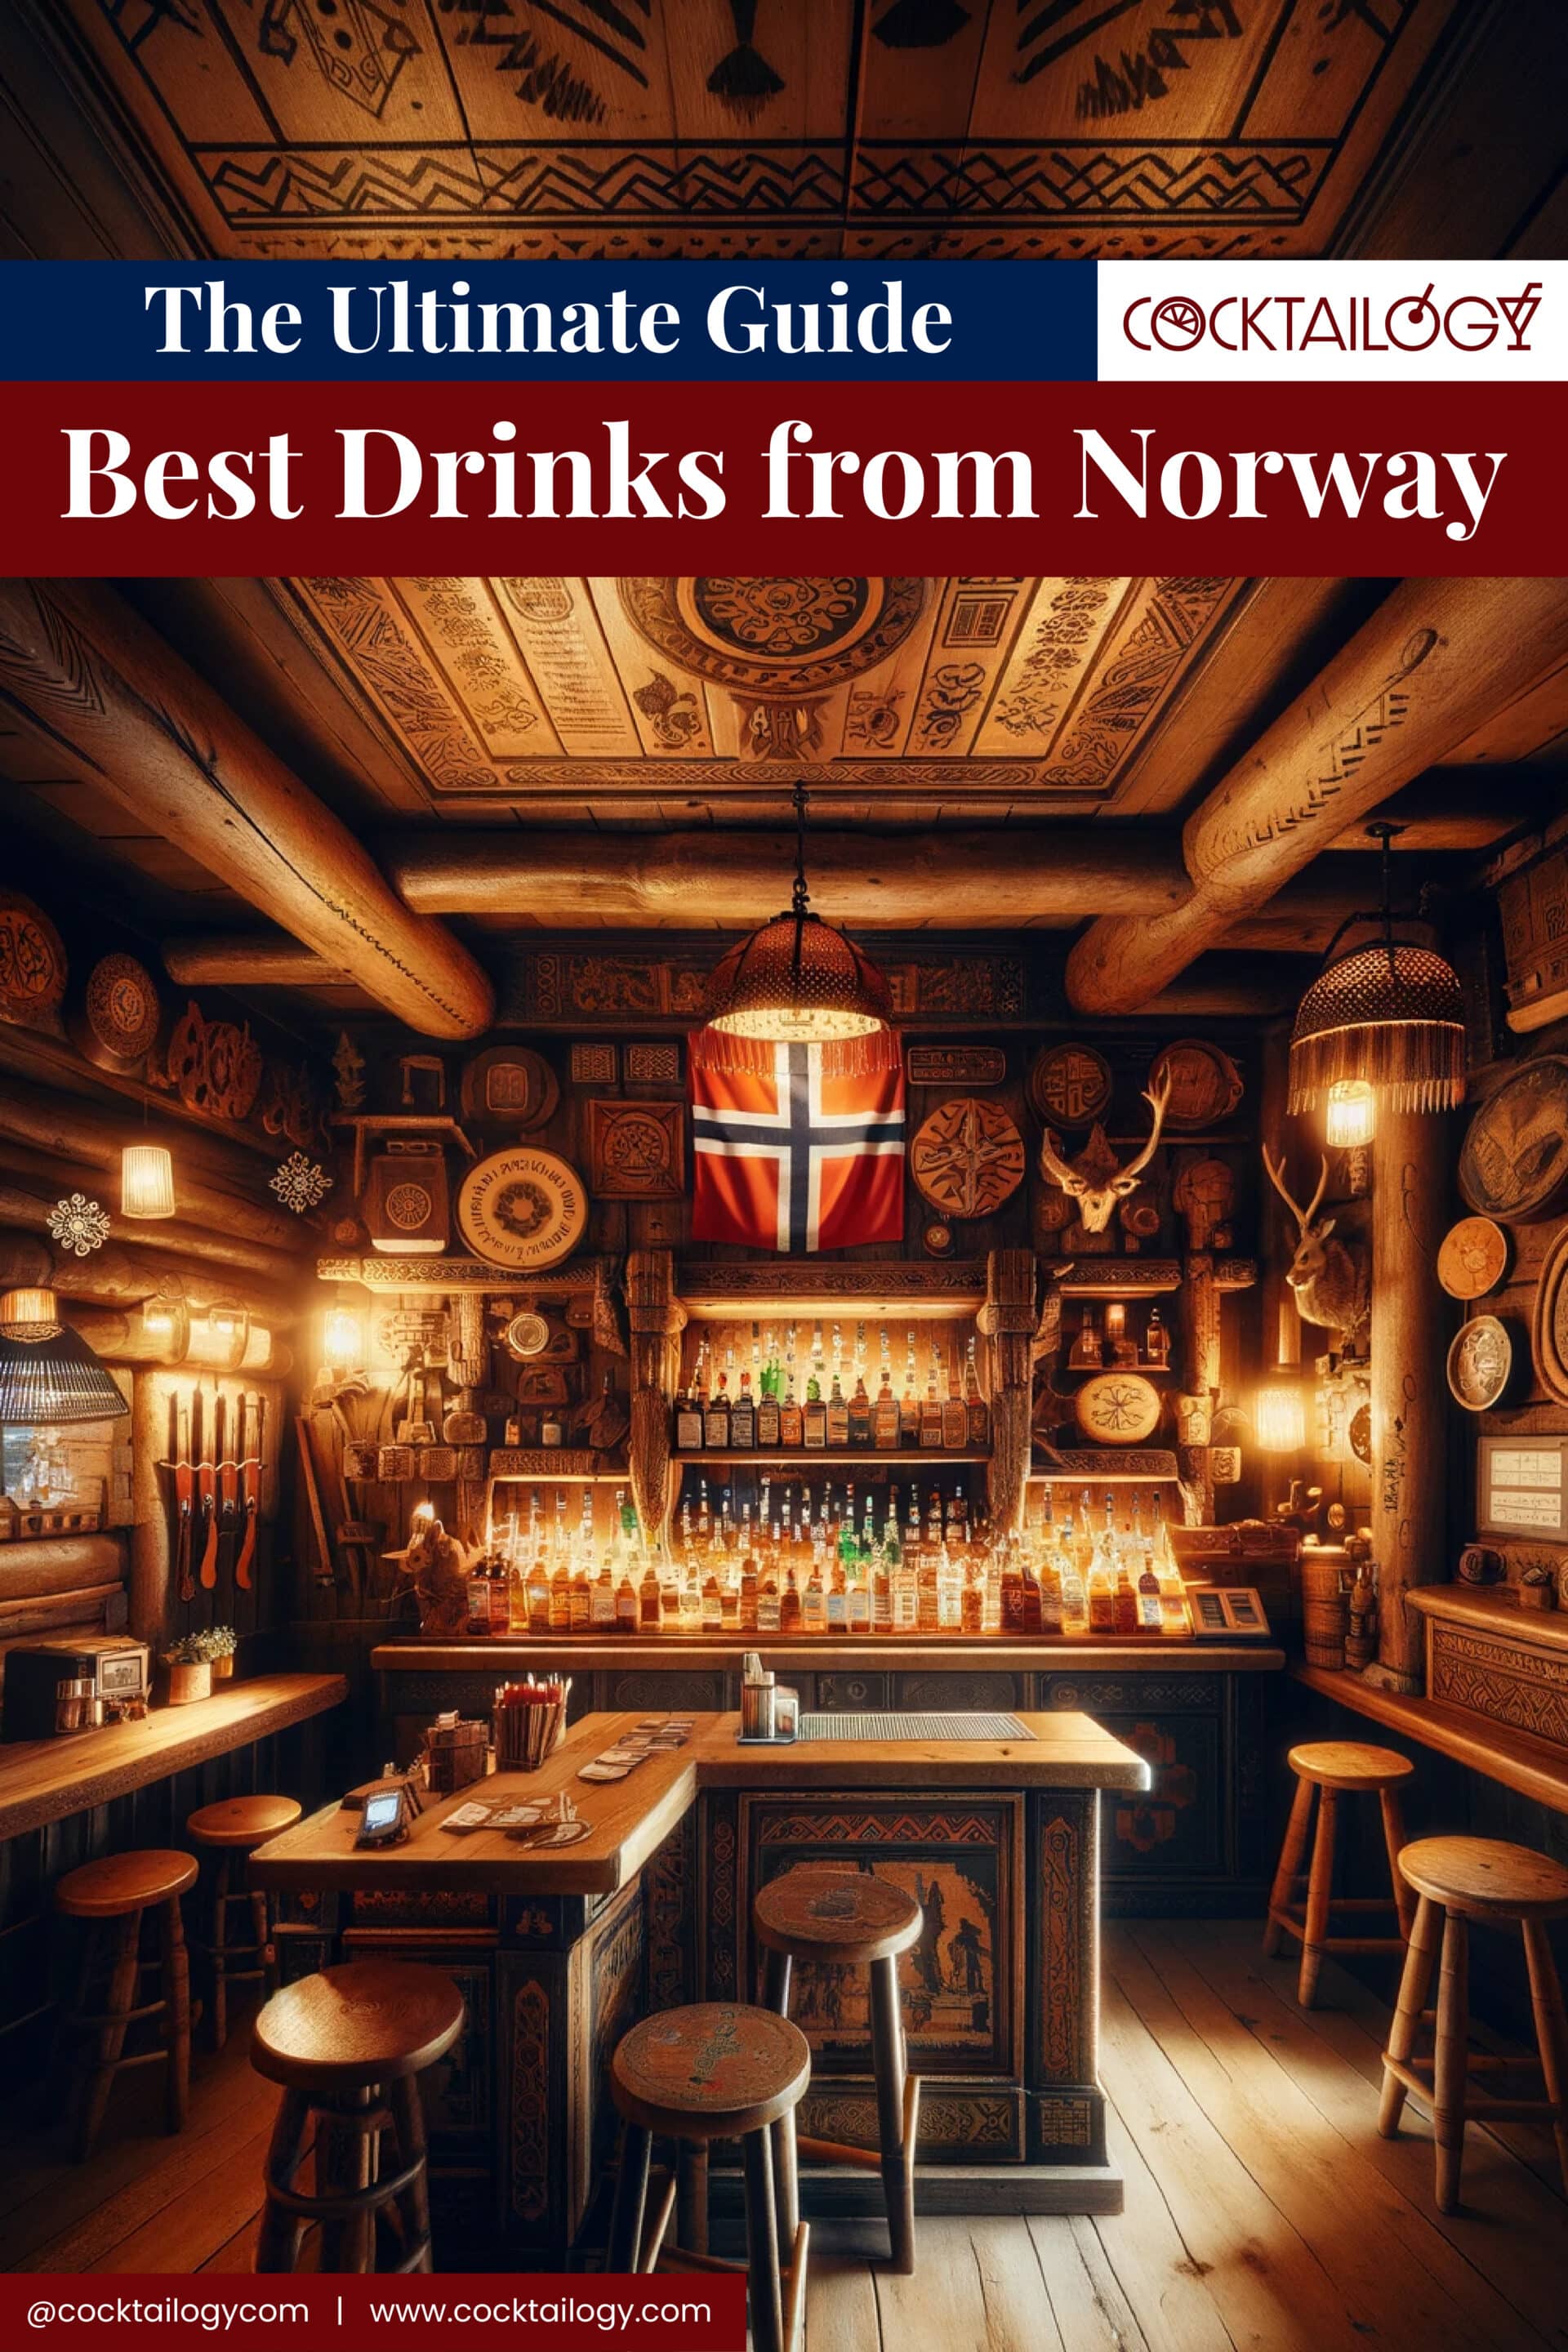 Drinks from Norway